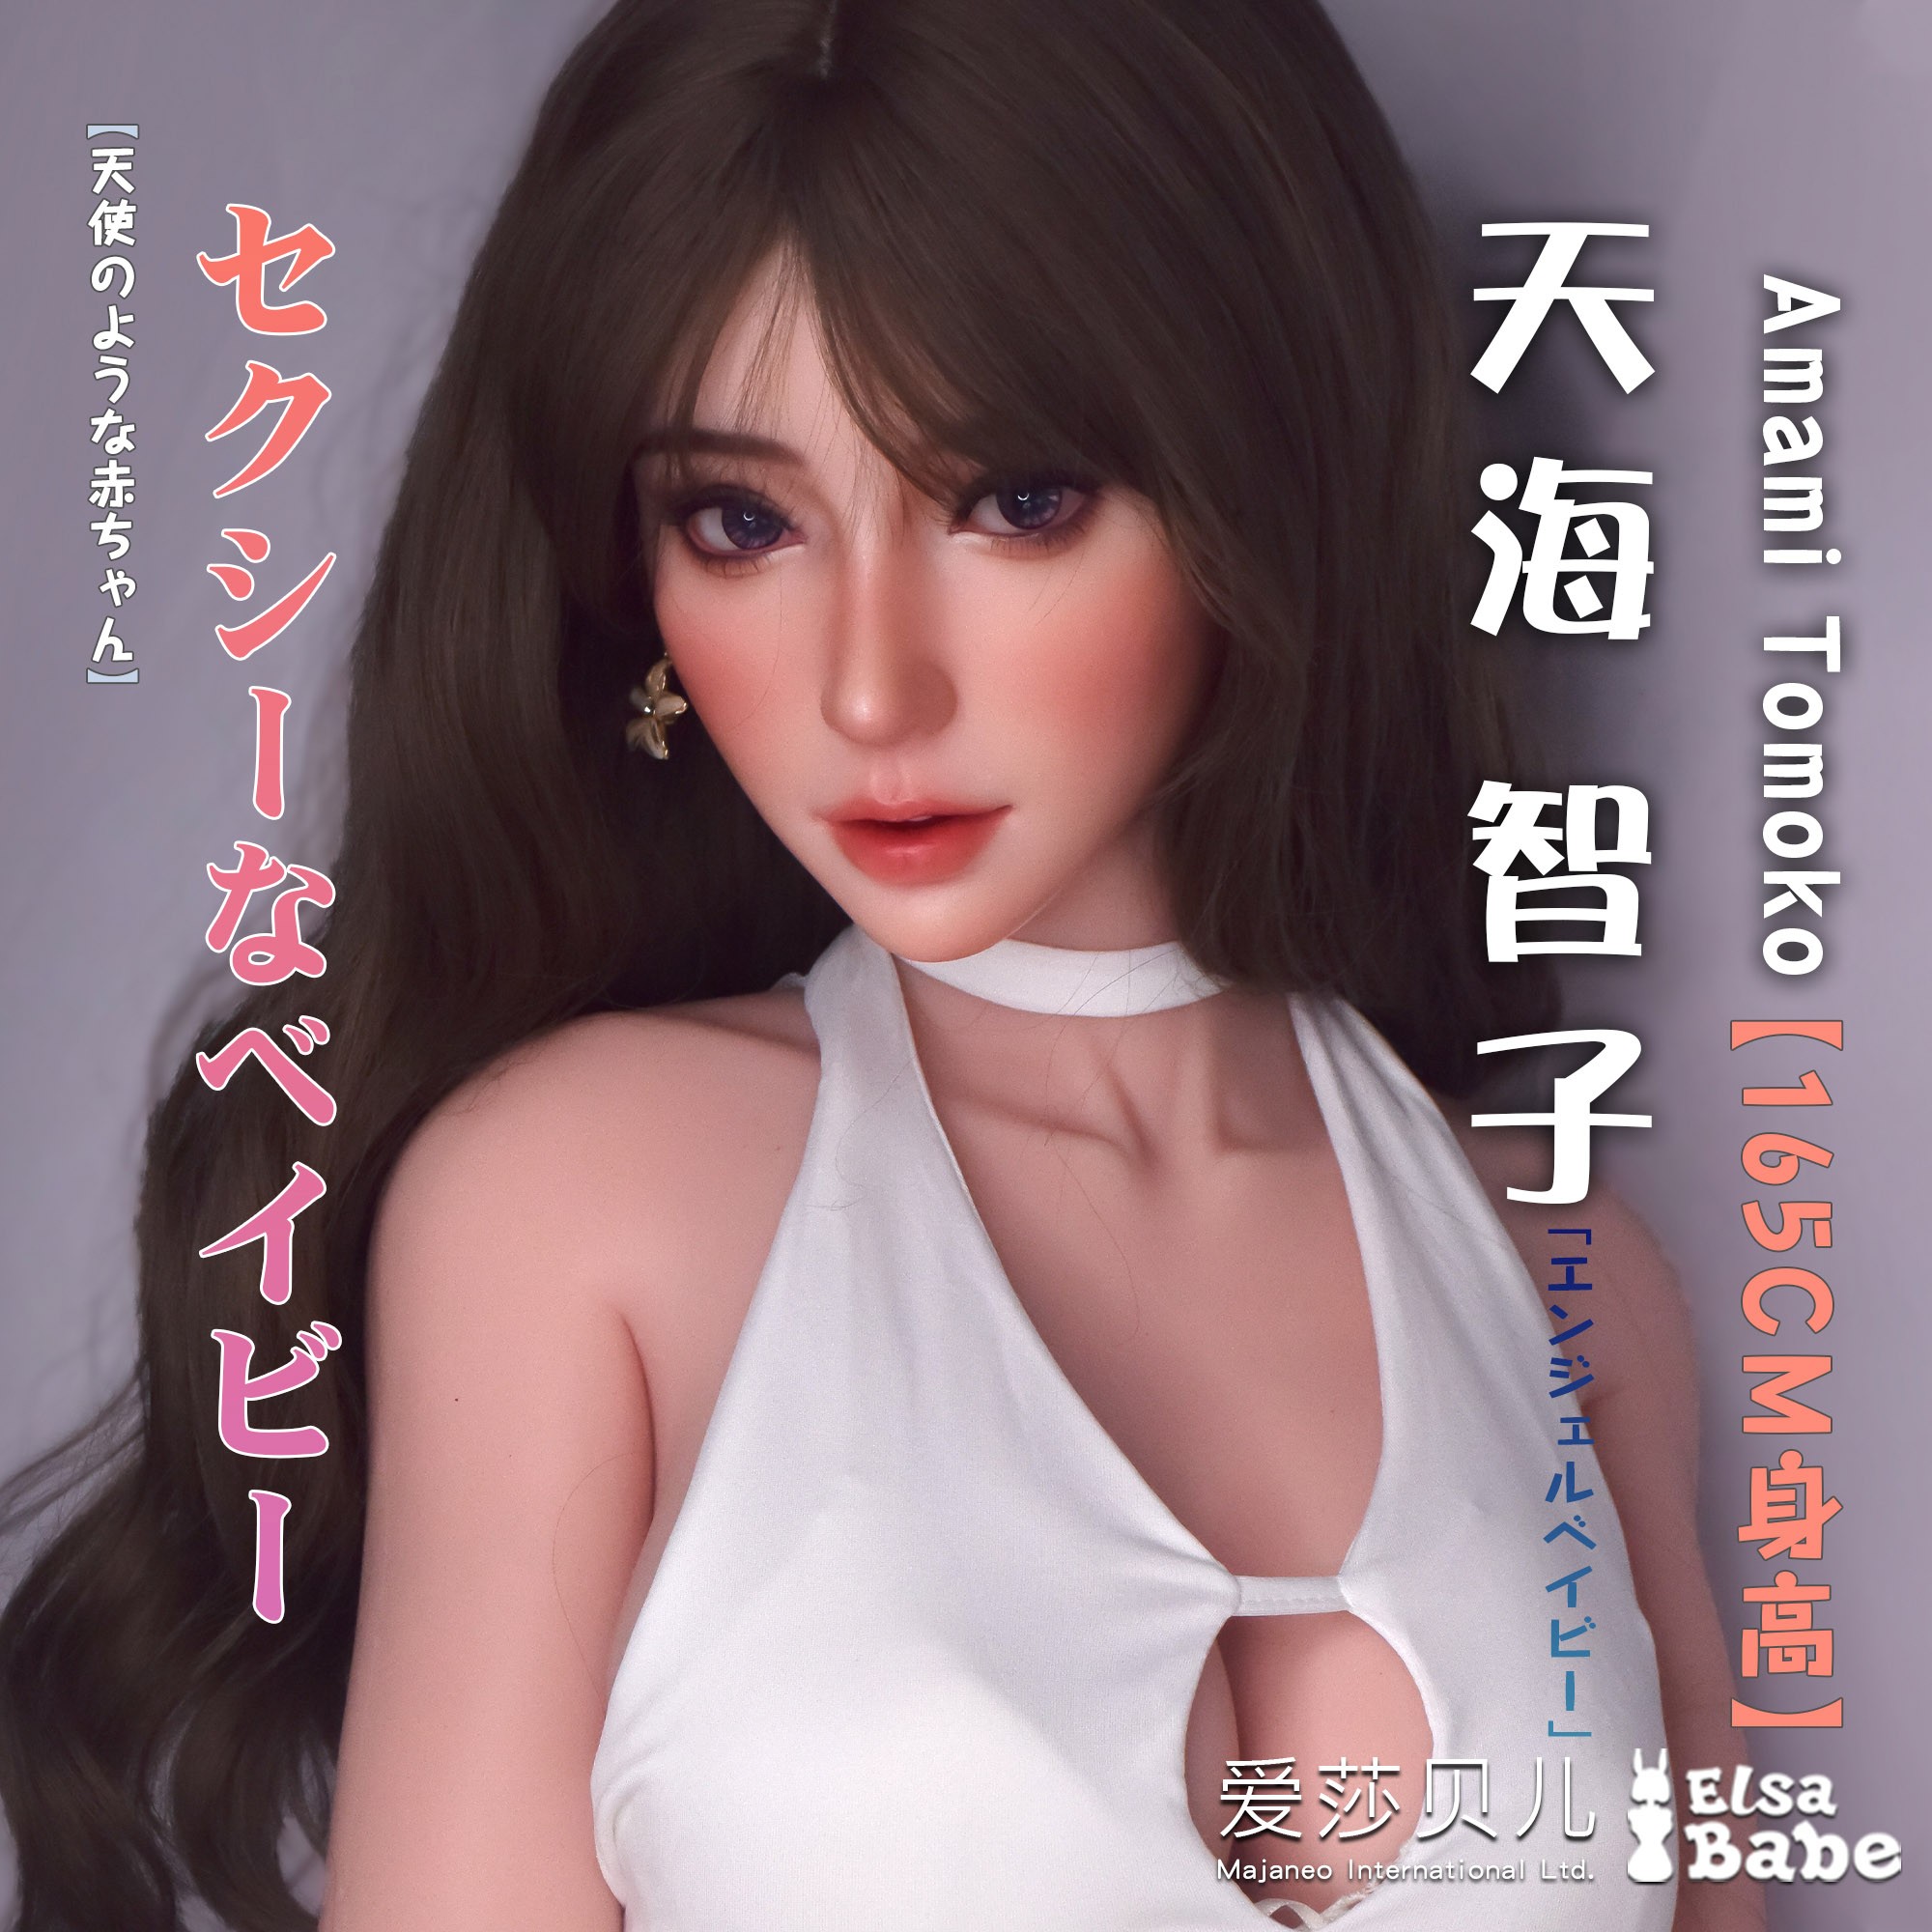 ElsaBabe 160cm/165cm Big Breasts Platinum Silicone Sex Doll Anime Figure Body Real Solid Erotic Toy with Metal Skeleton, Amami Tomoko